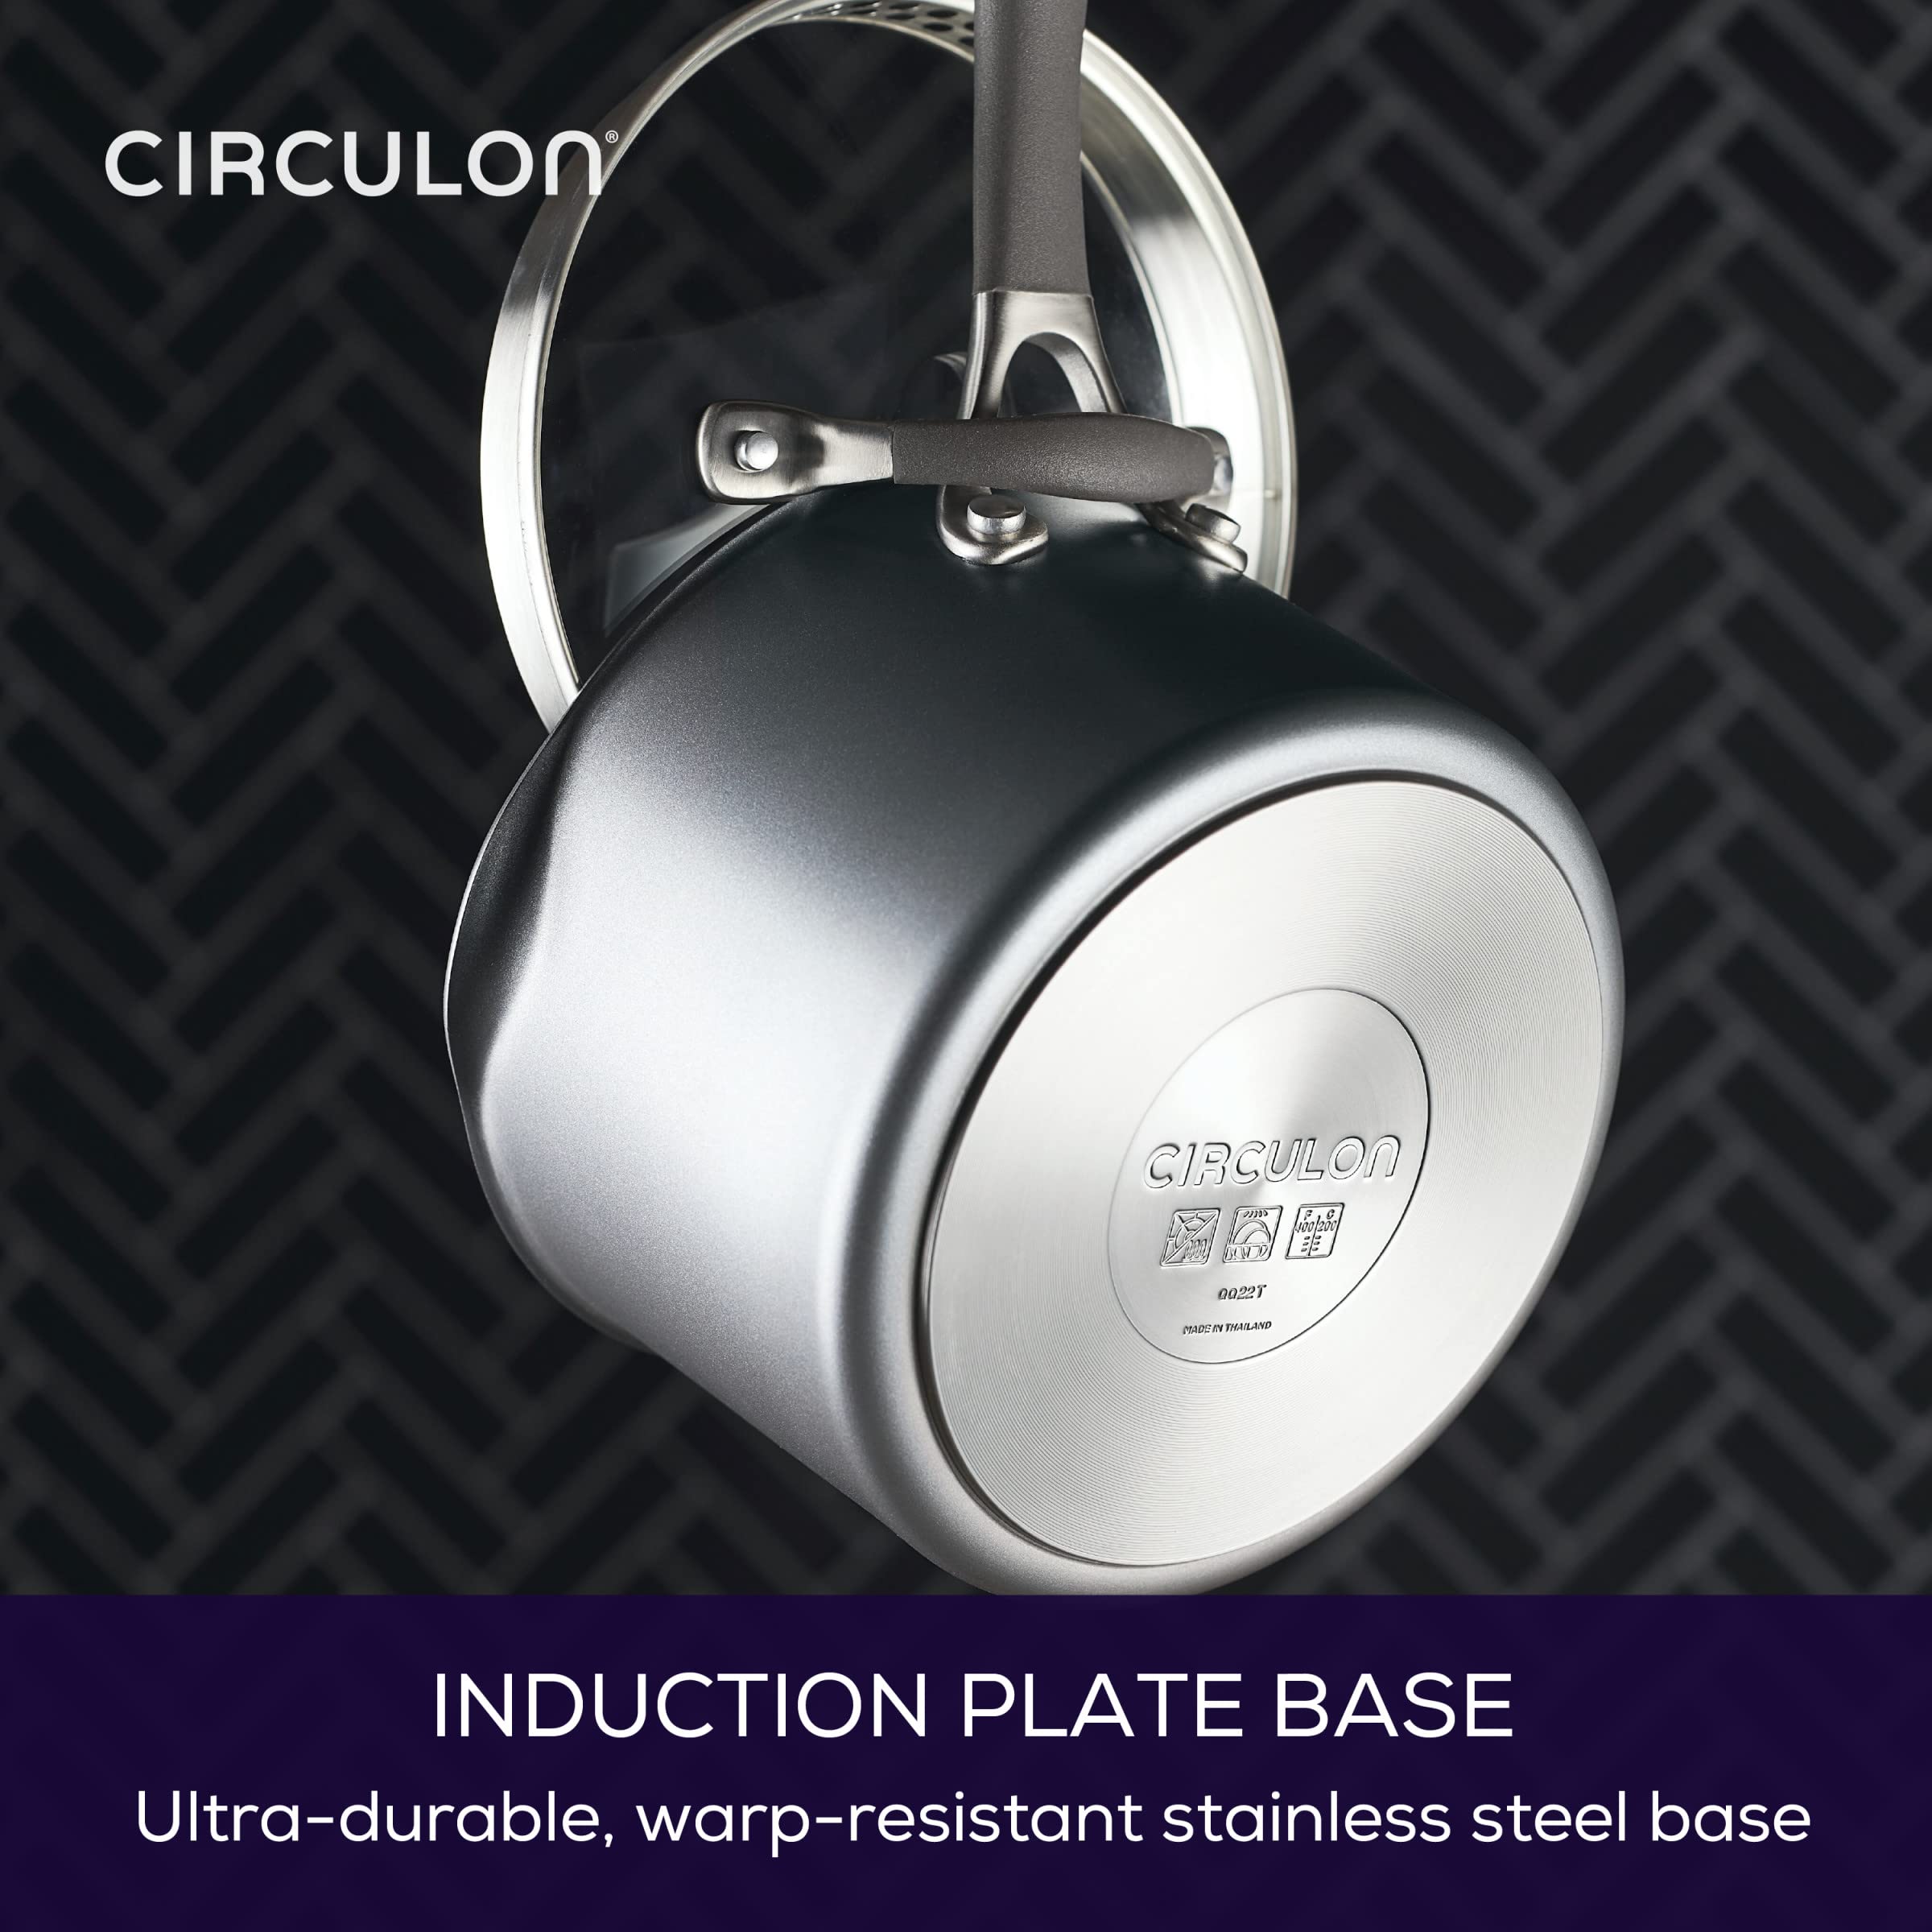 Circulon A1 Series with ScratchDefense Technology Nonstick Induction Straining Sauce Pan with Lid, 3 Quart, Graphite